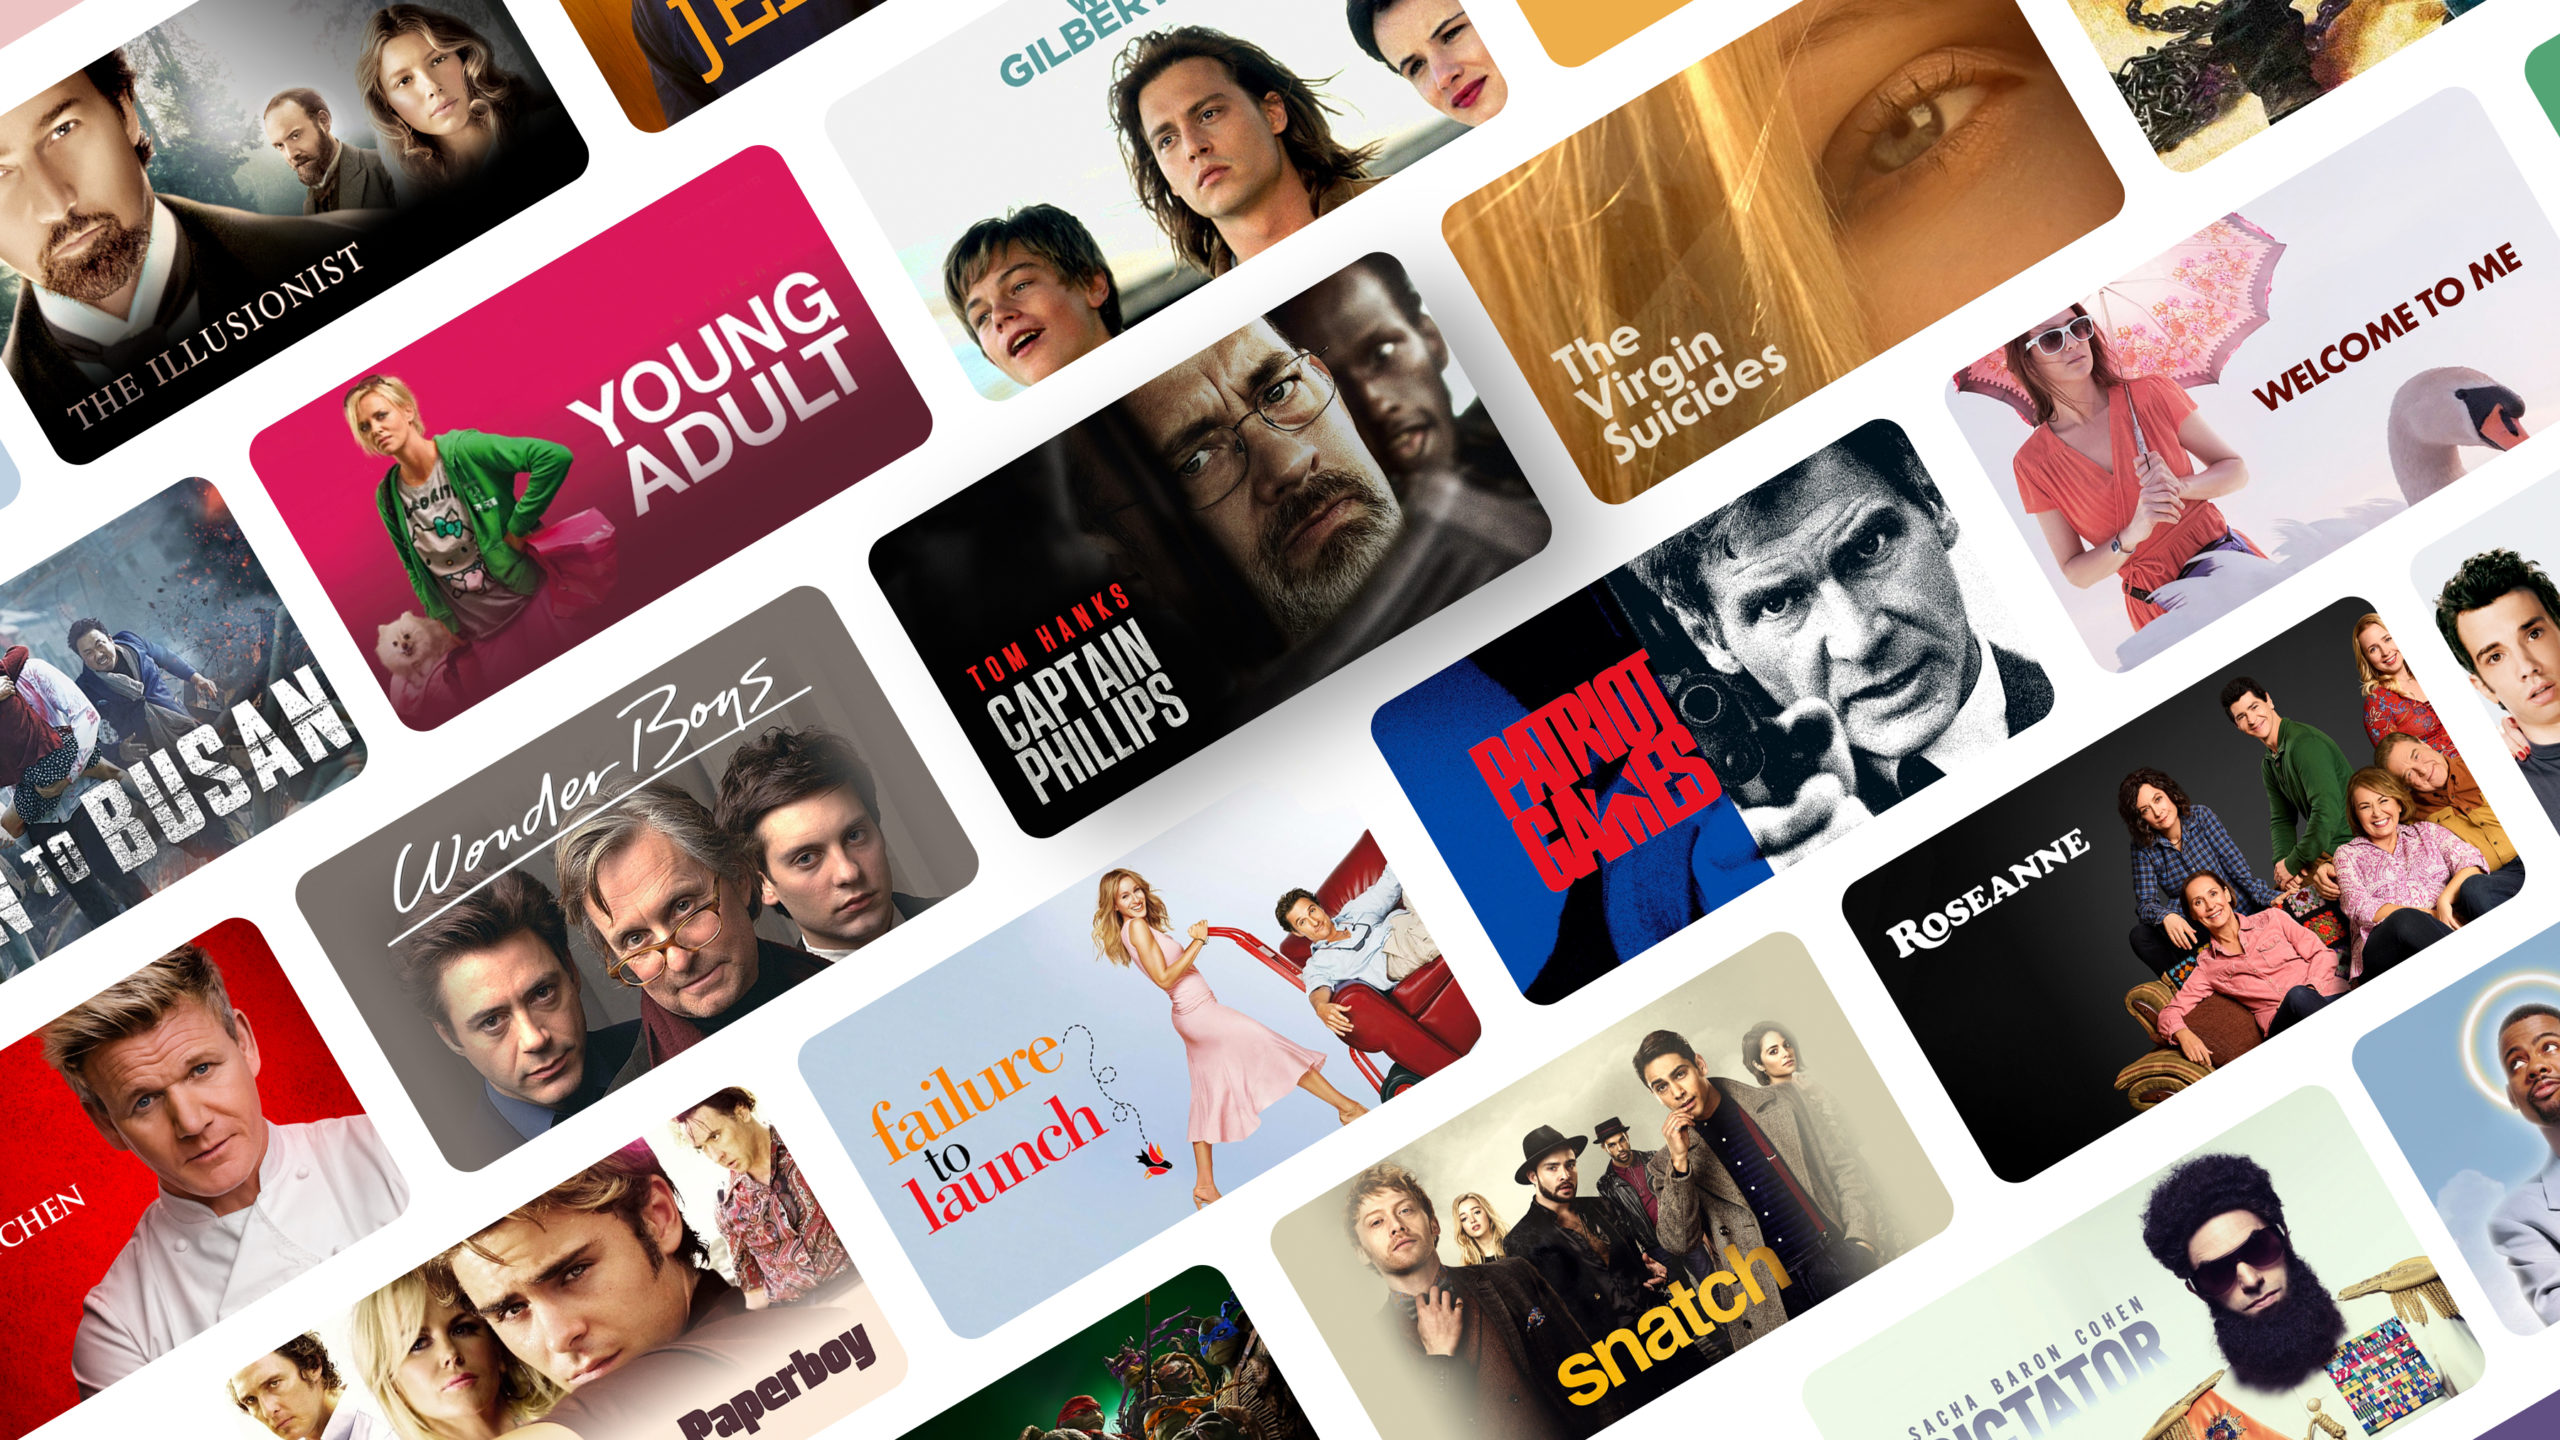 Free Streaming Service Crackle Comes to Plex